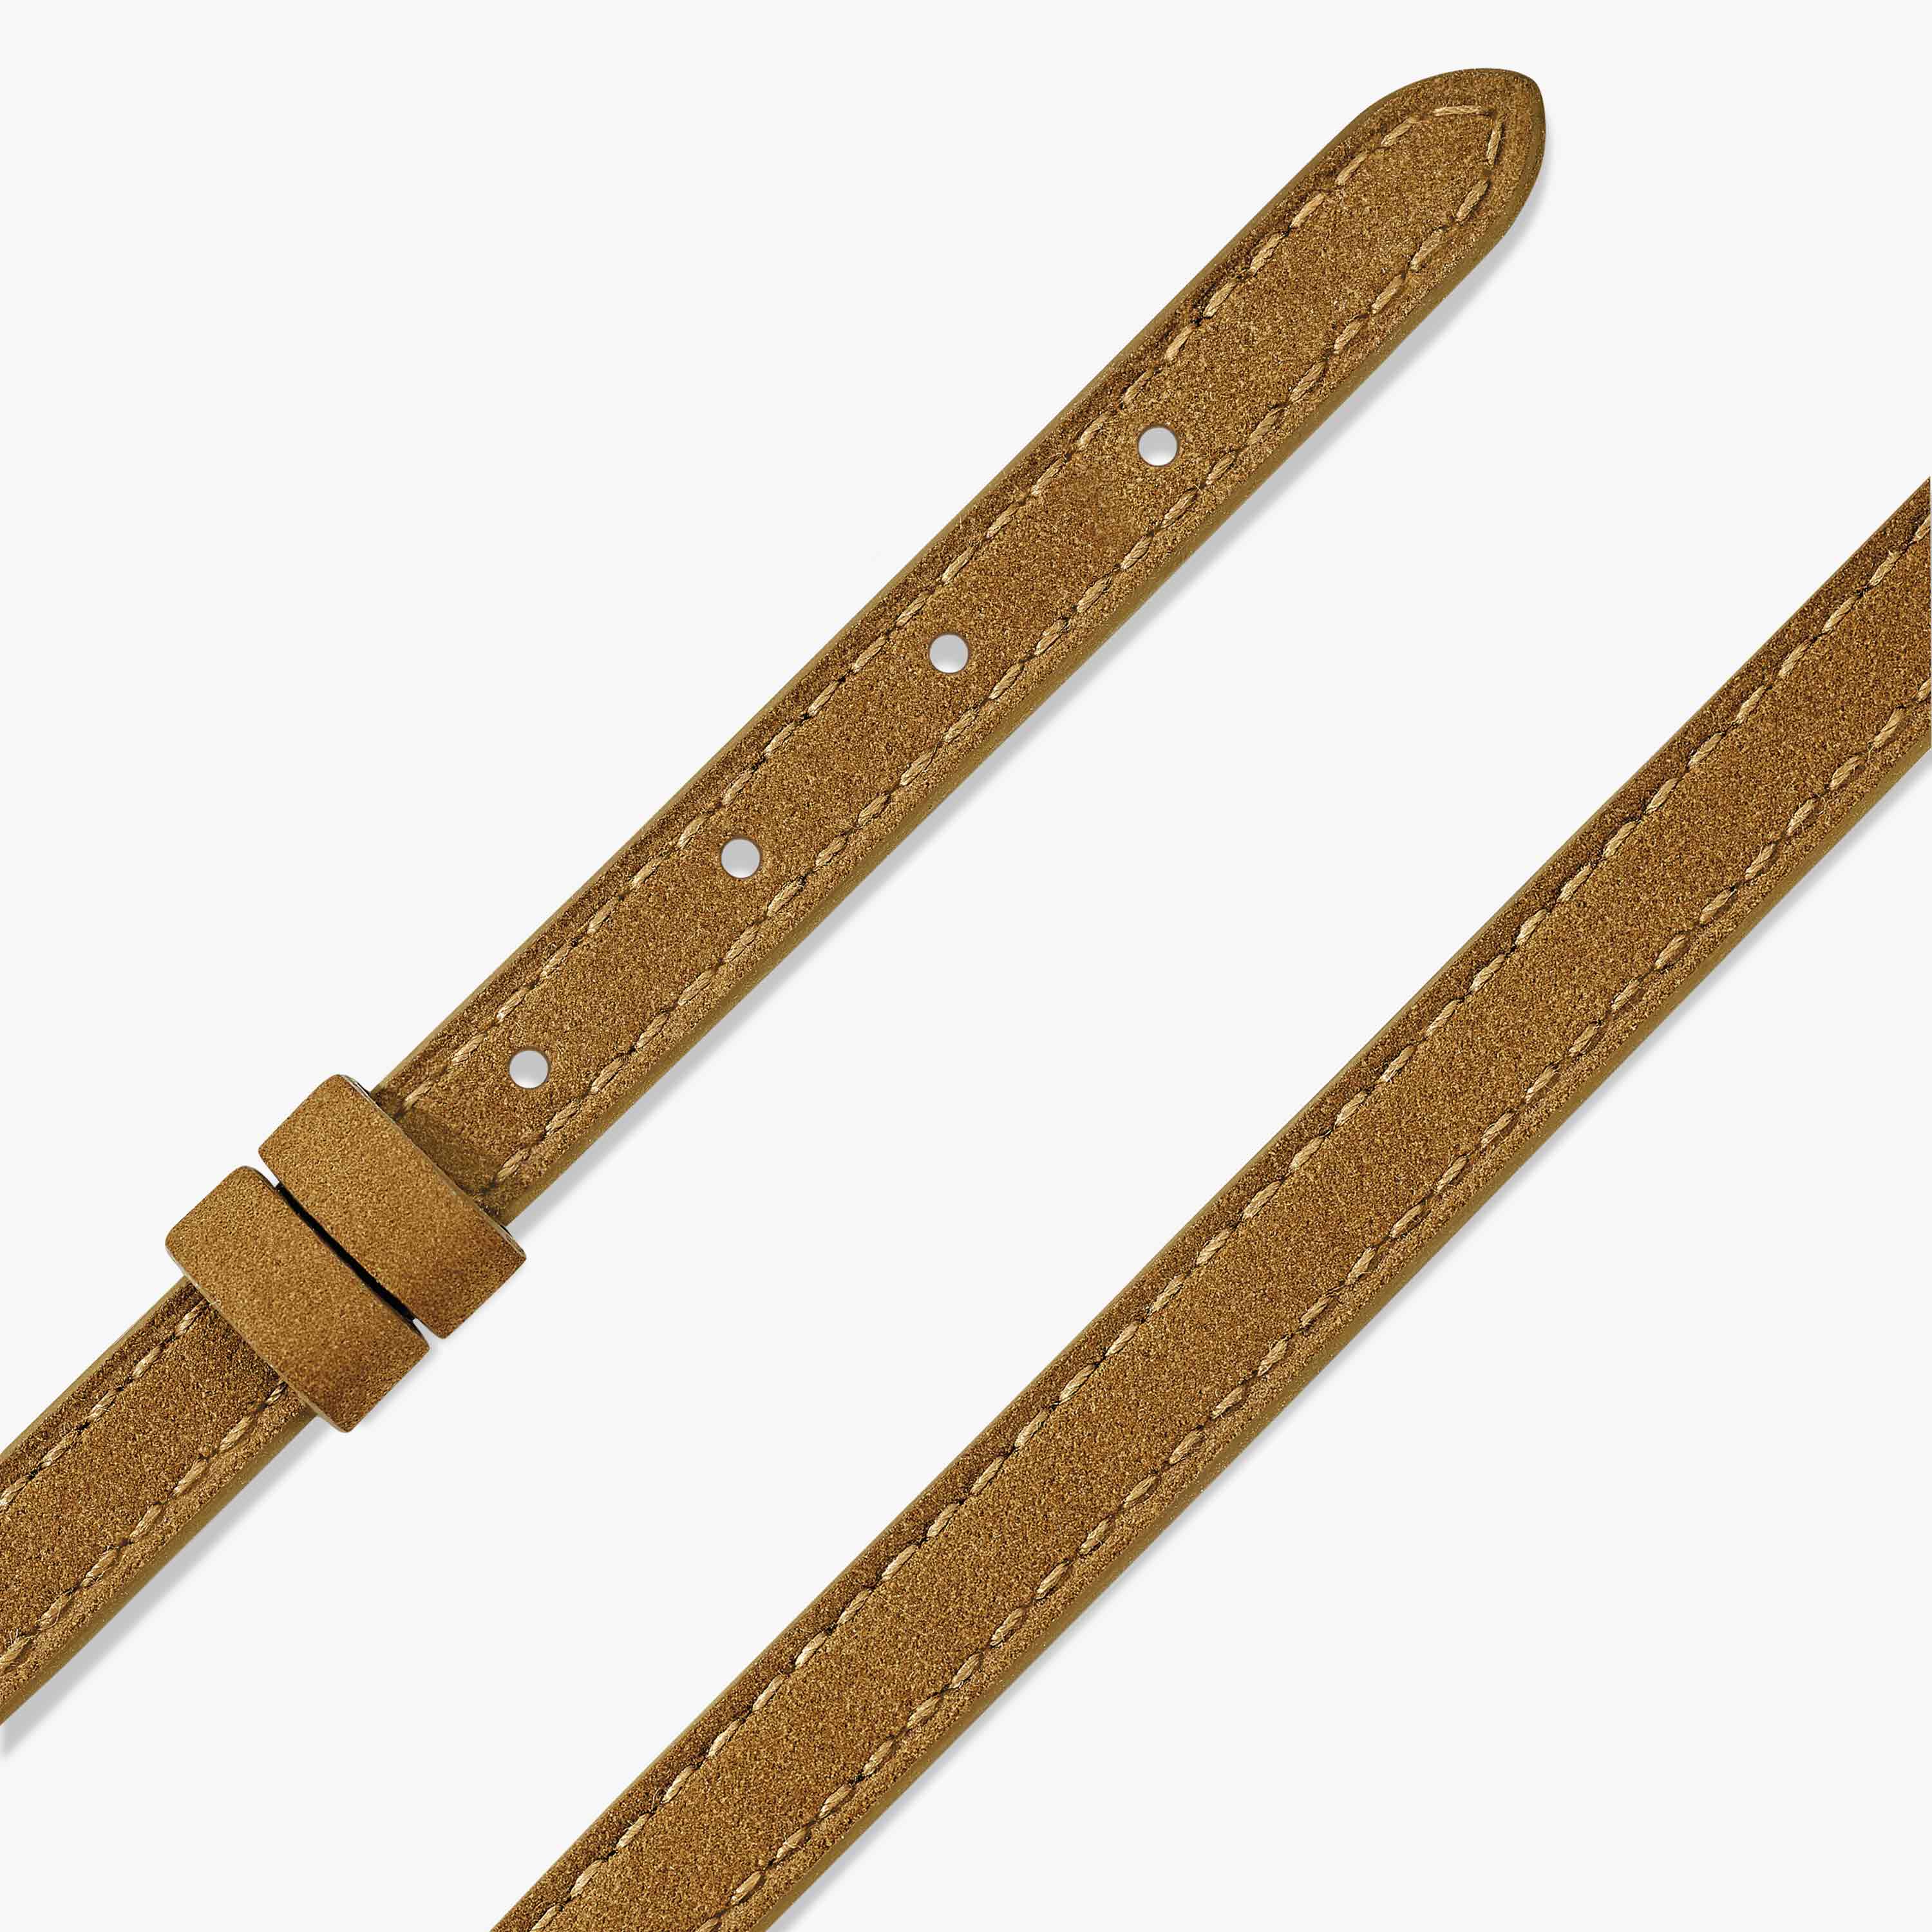 Make My Move-Cuir Tobacco Nubuck-XS Leather Mixed Bracelet 32014-XS